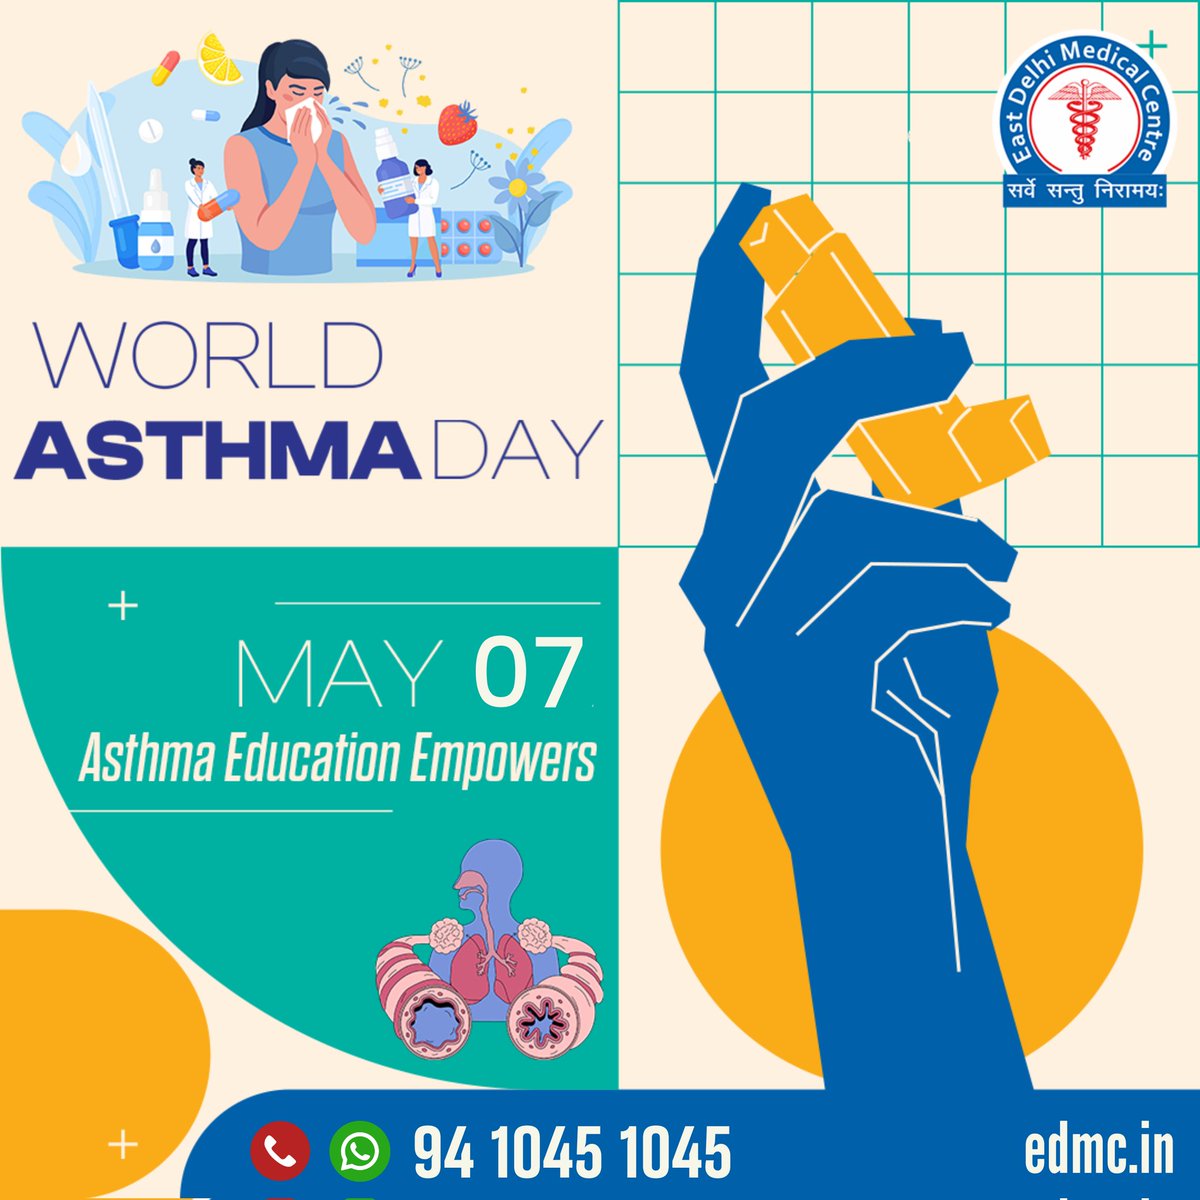 There are few restrictions on your life with asthma, as long as you take care of yourself.” — Jackie Joyner-Kersee 

Today we commemorate World Asthma Day with the 2024 theme Asthma Education Empowers!

 #WorldAsthmaDay #BreatheFreely #eastdelhimedicalcentre #asthmaproblems